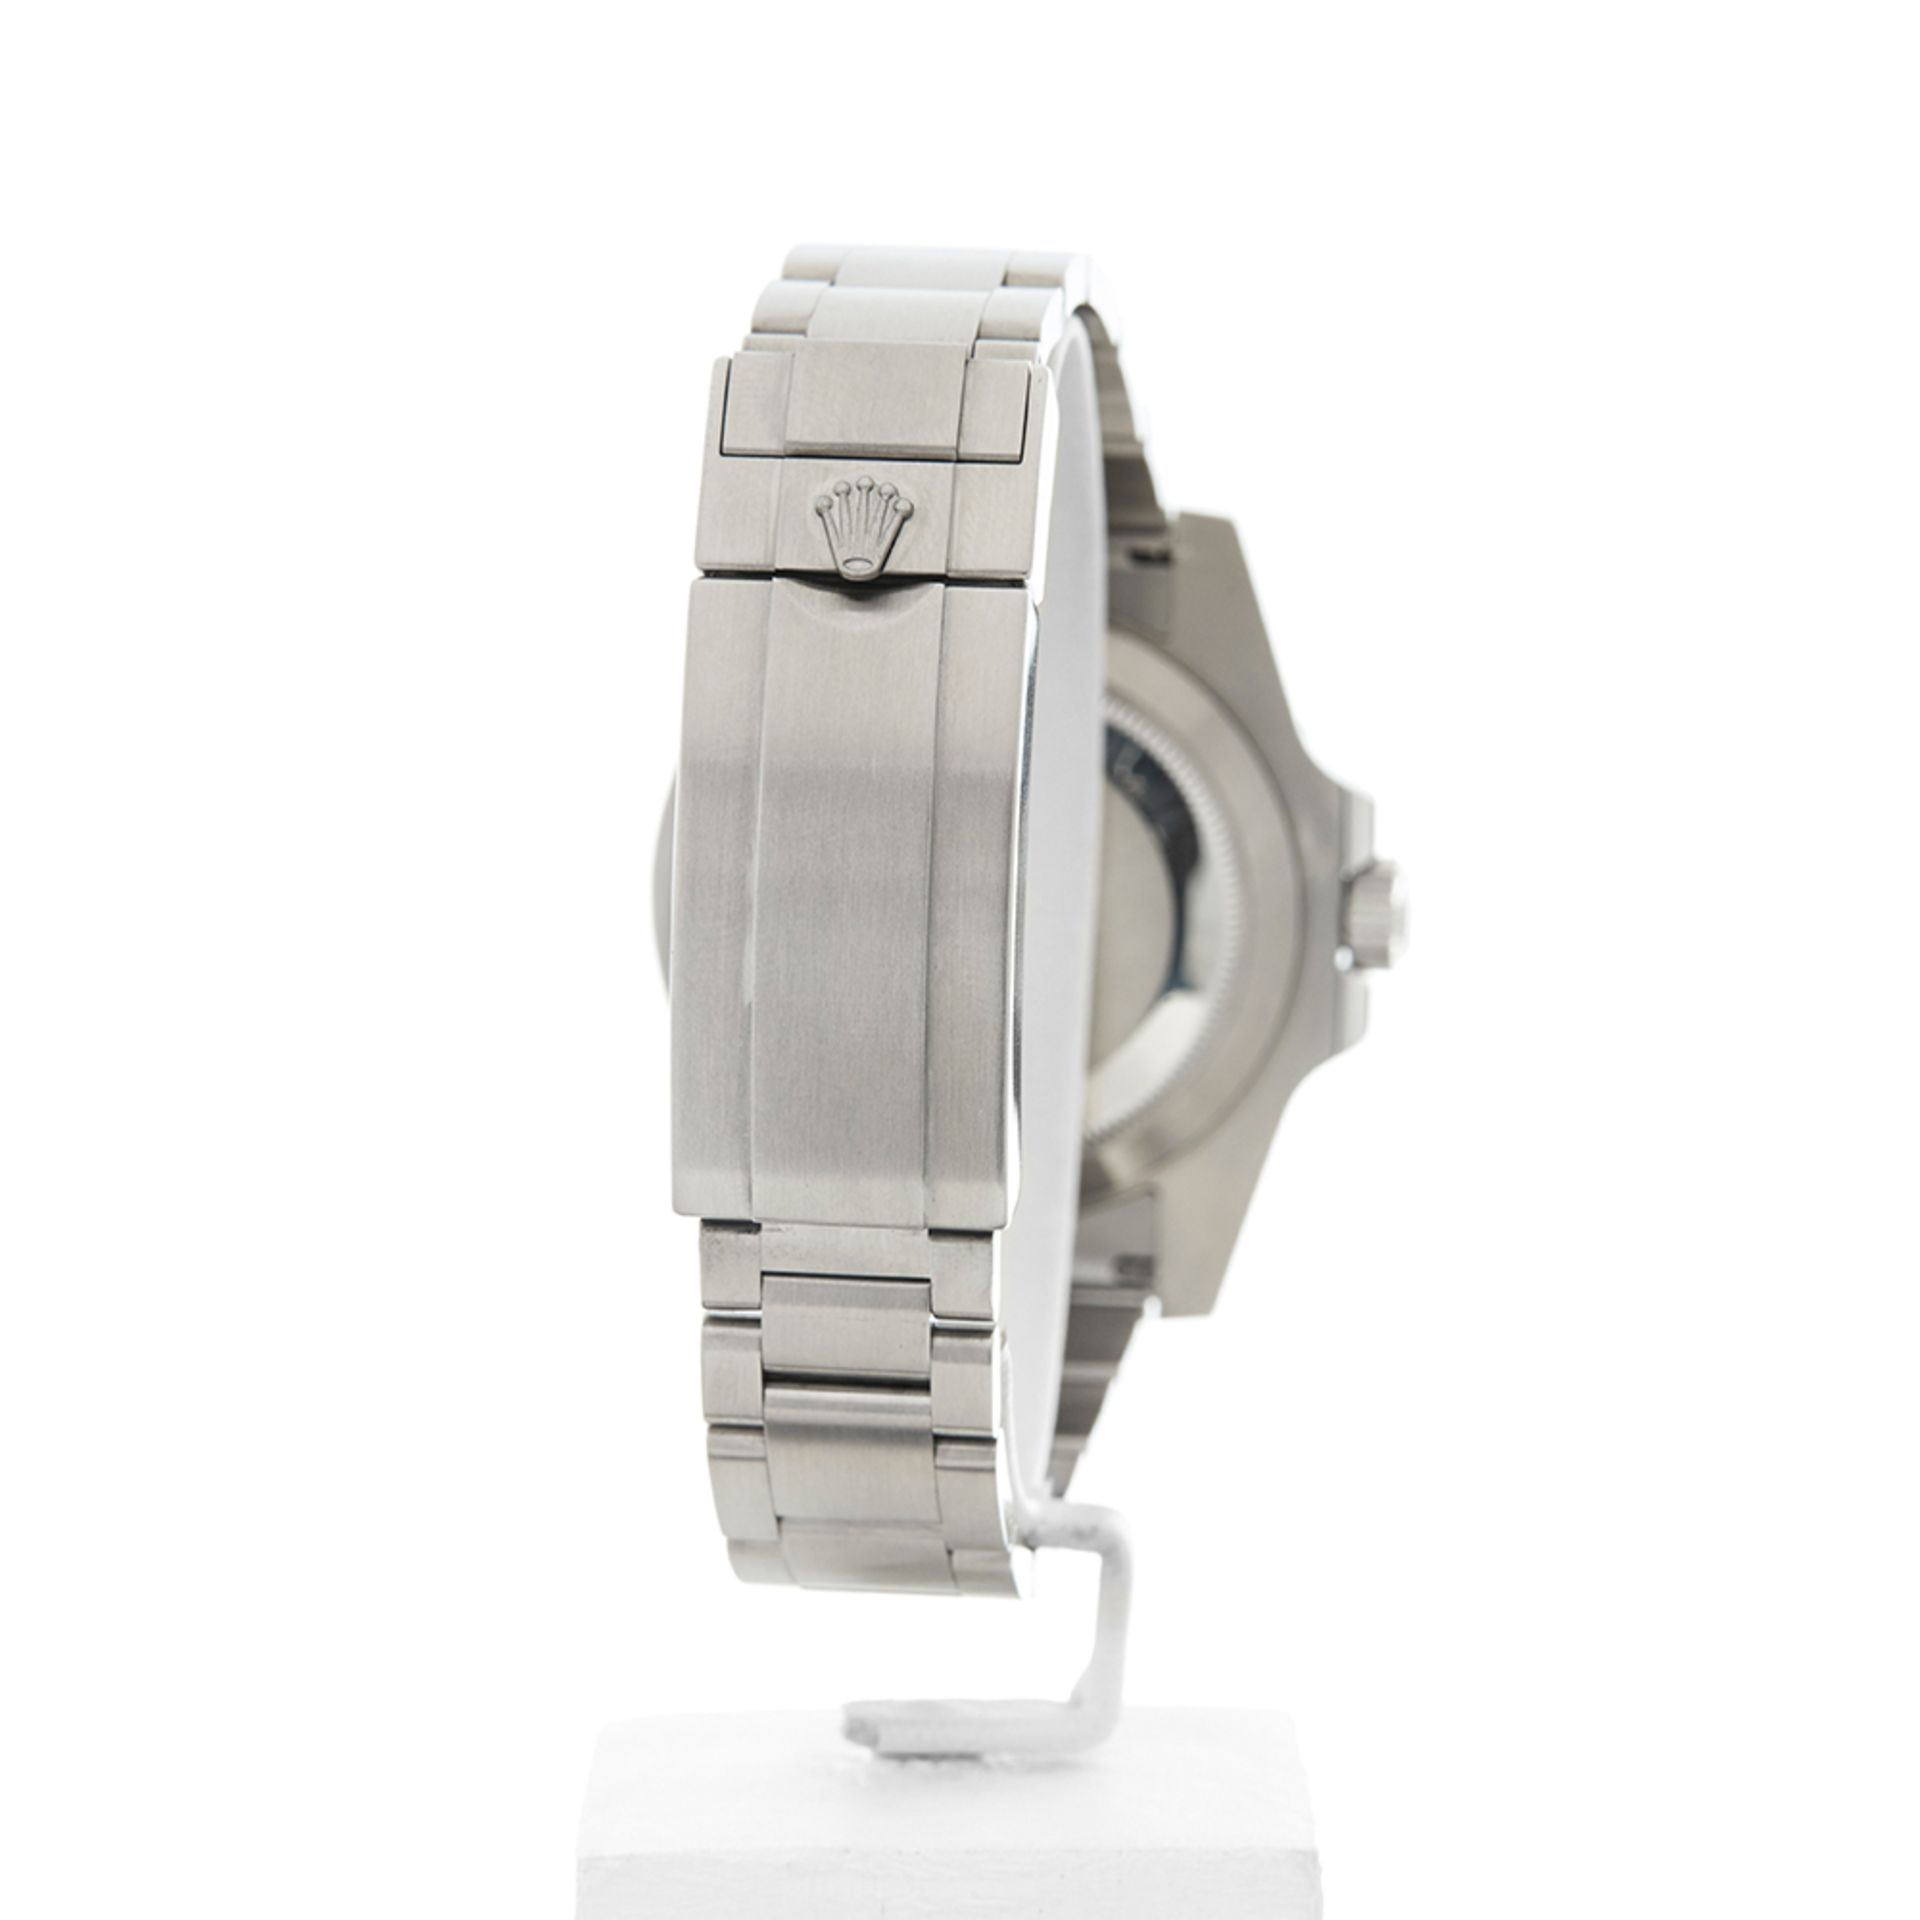 Submariner Date 40mm Stainless Steel 116610LN - Image 7 of 8